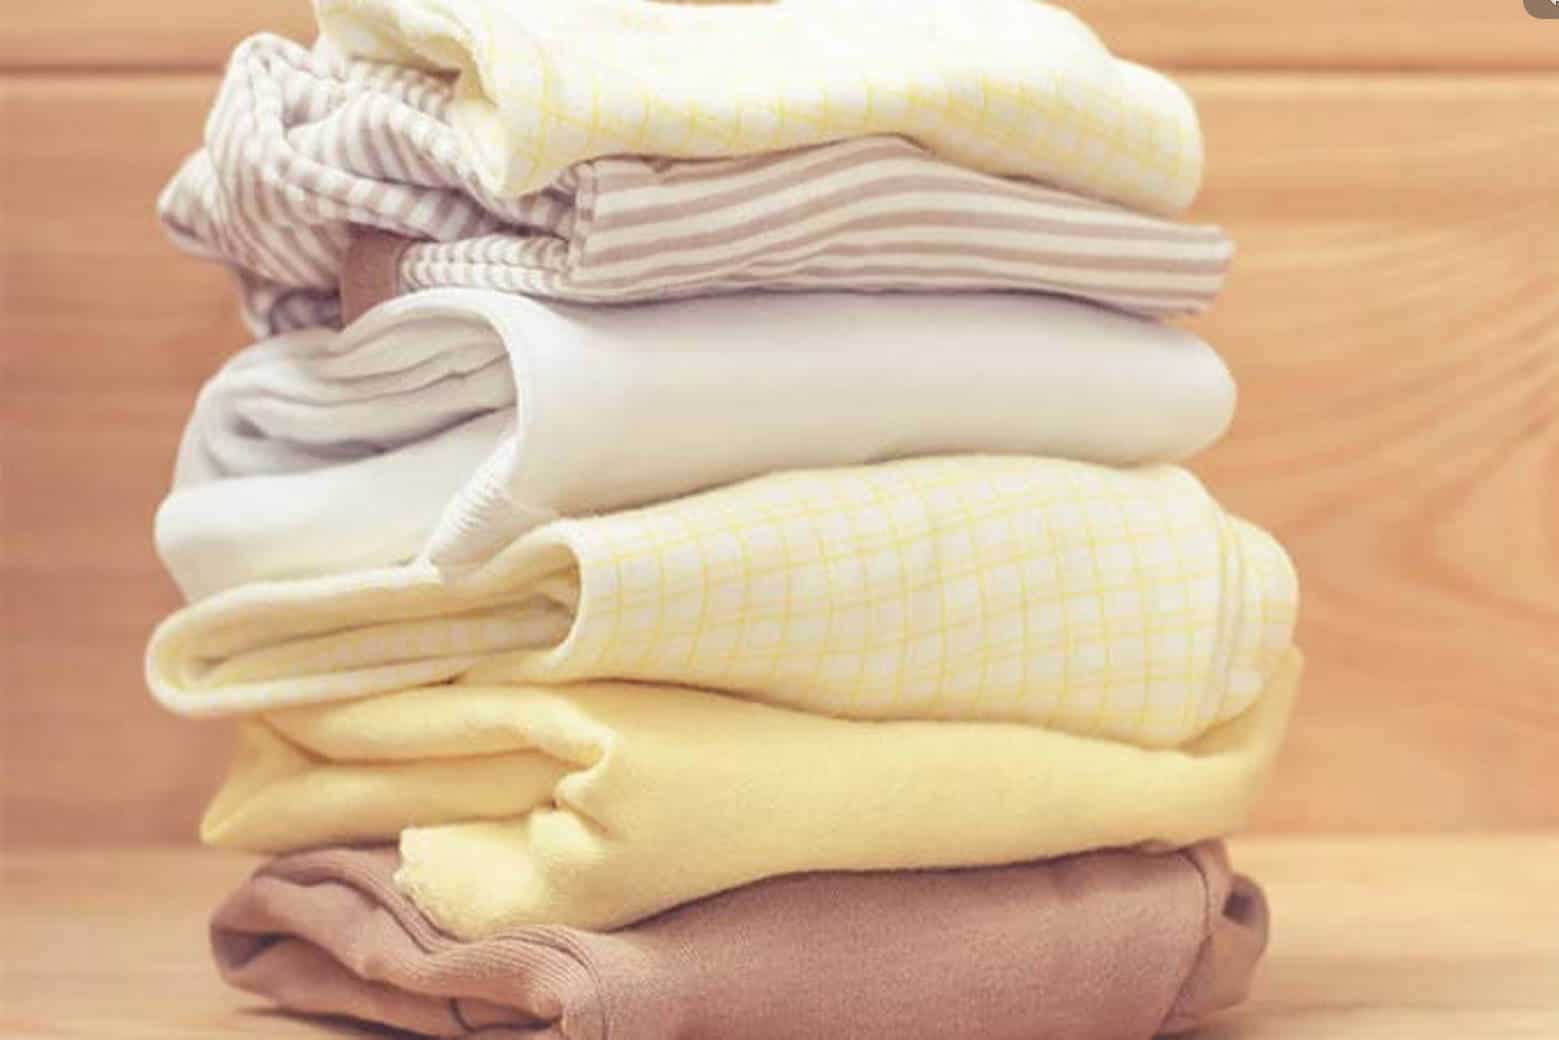 Why Fold Baby Clothes?